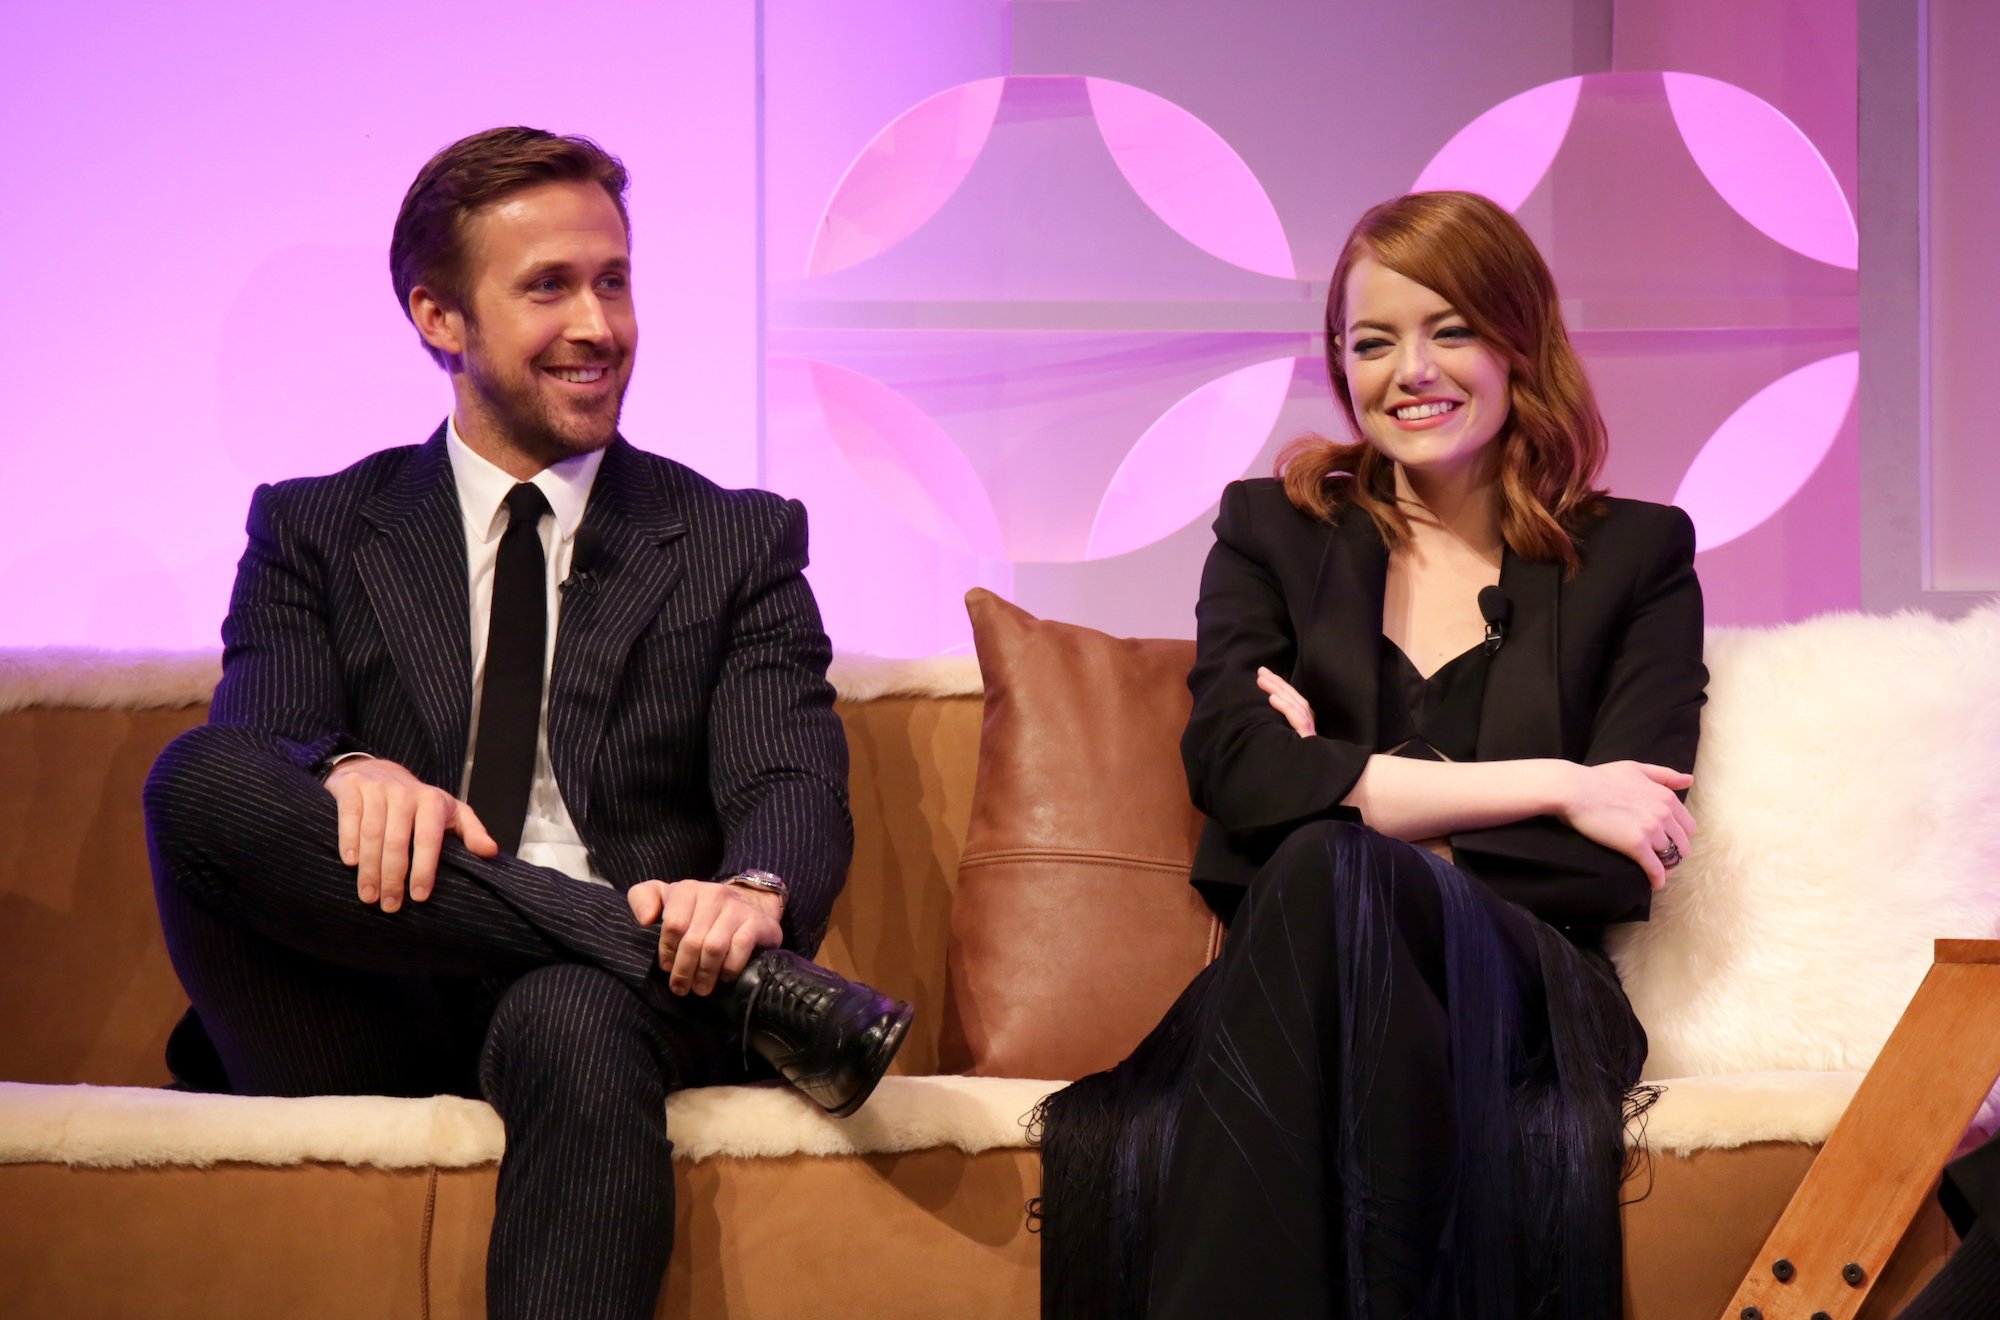 (L-R) Ryan Gosling and Emma Stone smiling, sitting on a couch